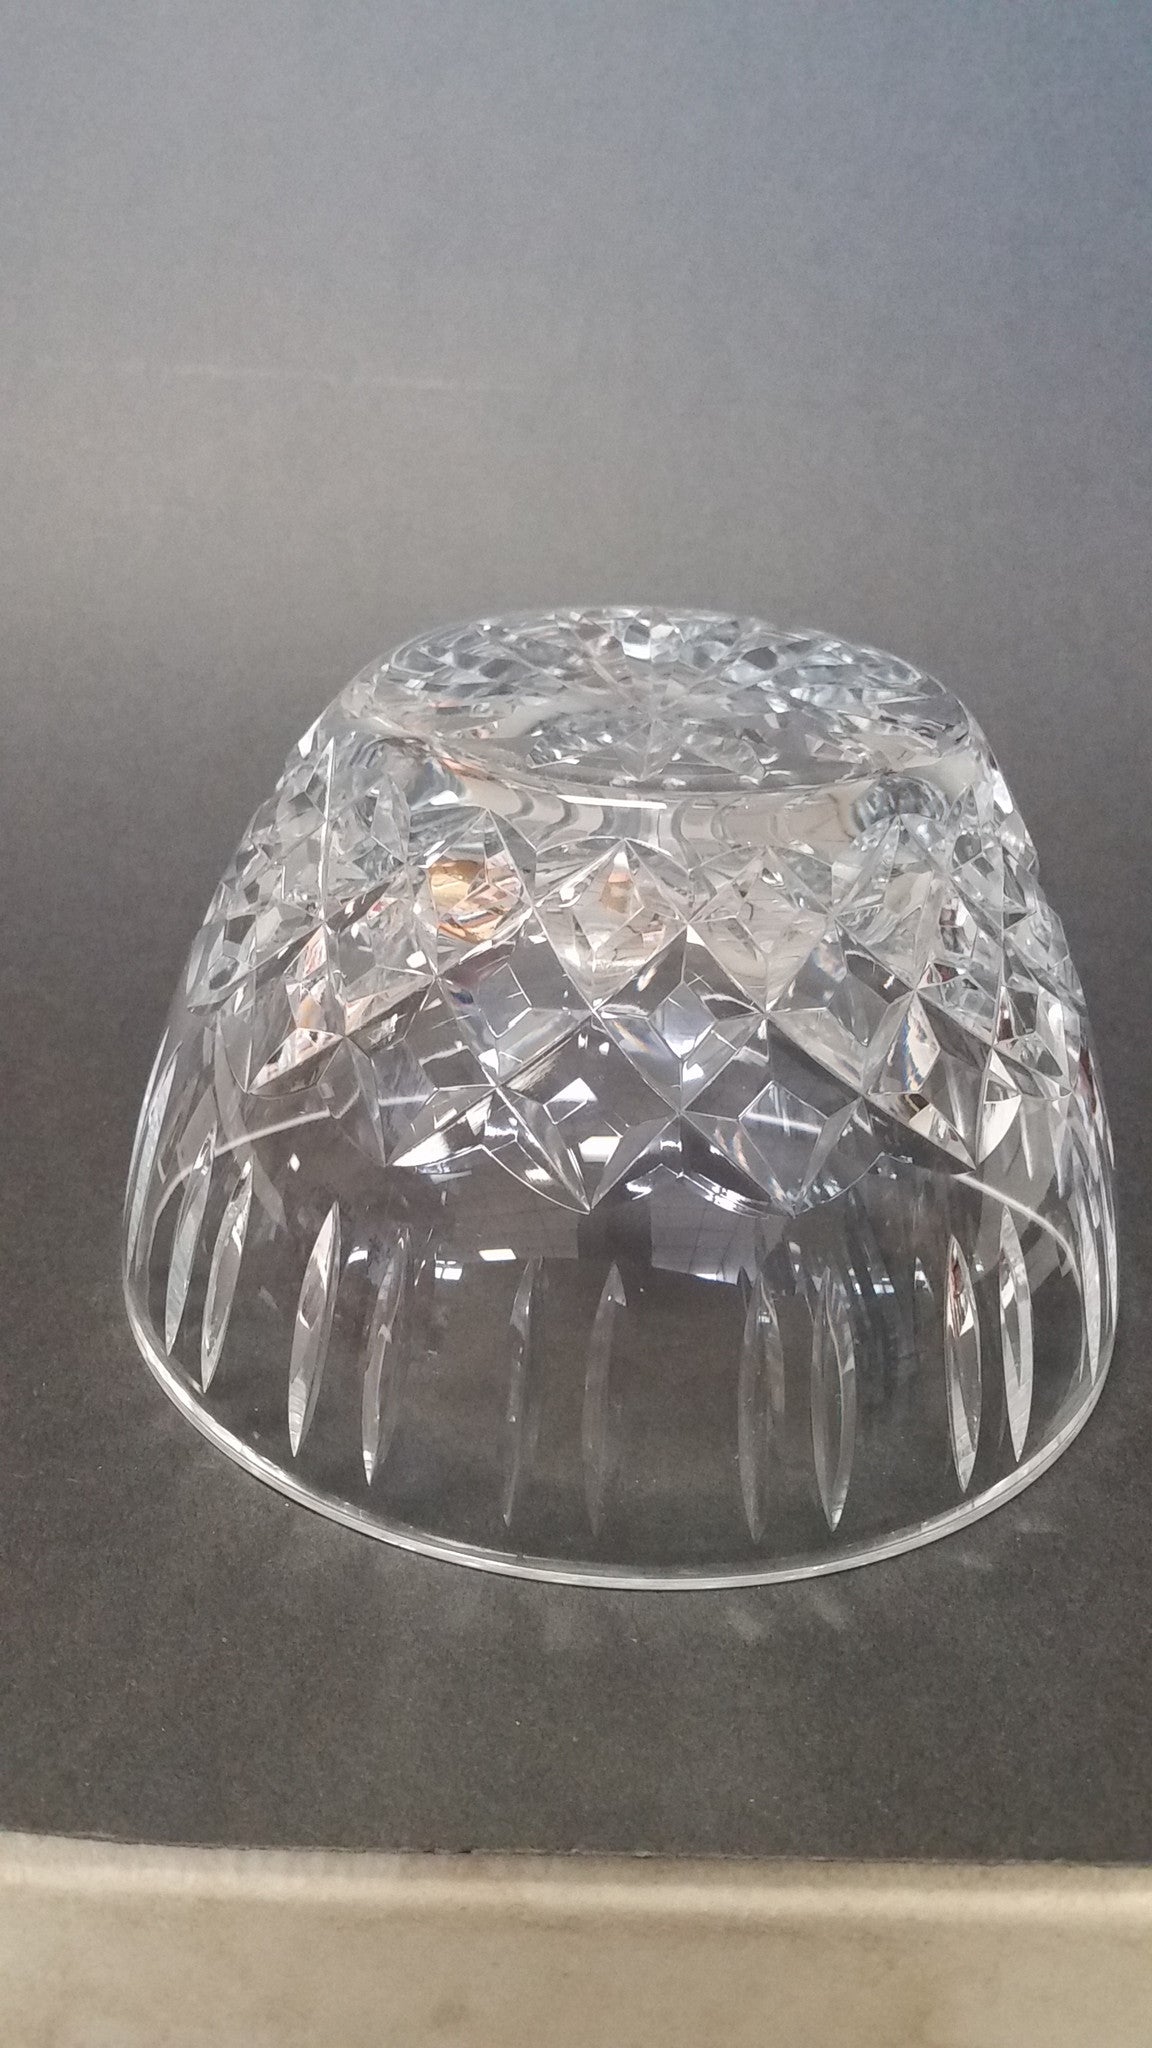 Hand cut and hand polished crystal bowl Triumph pattern - O'Rourke crystal awards & gifts abp cut glass